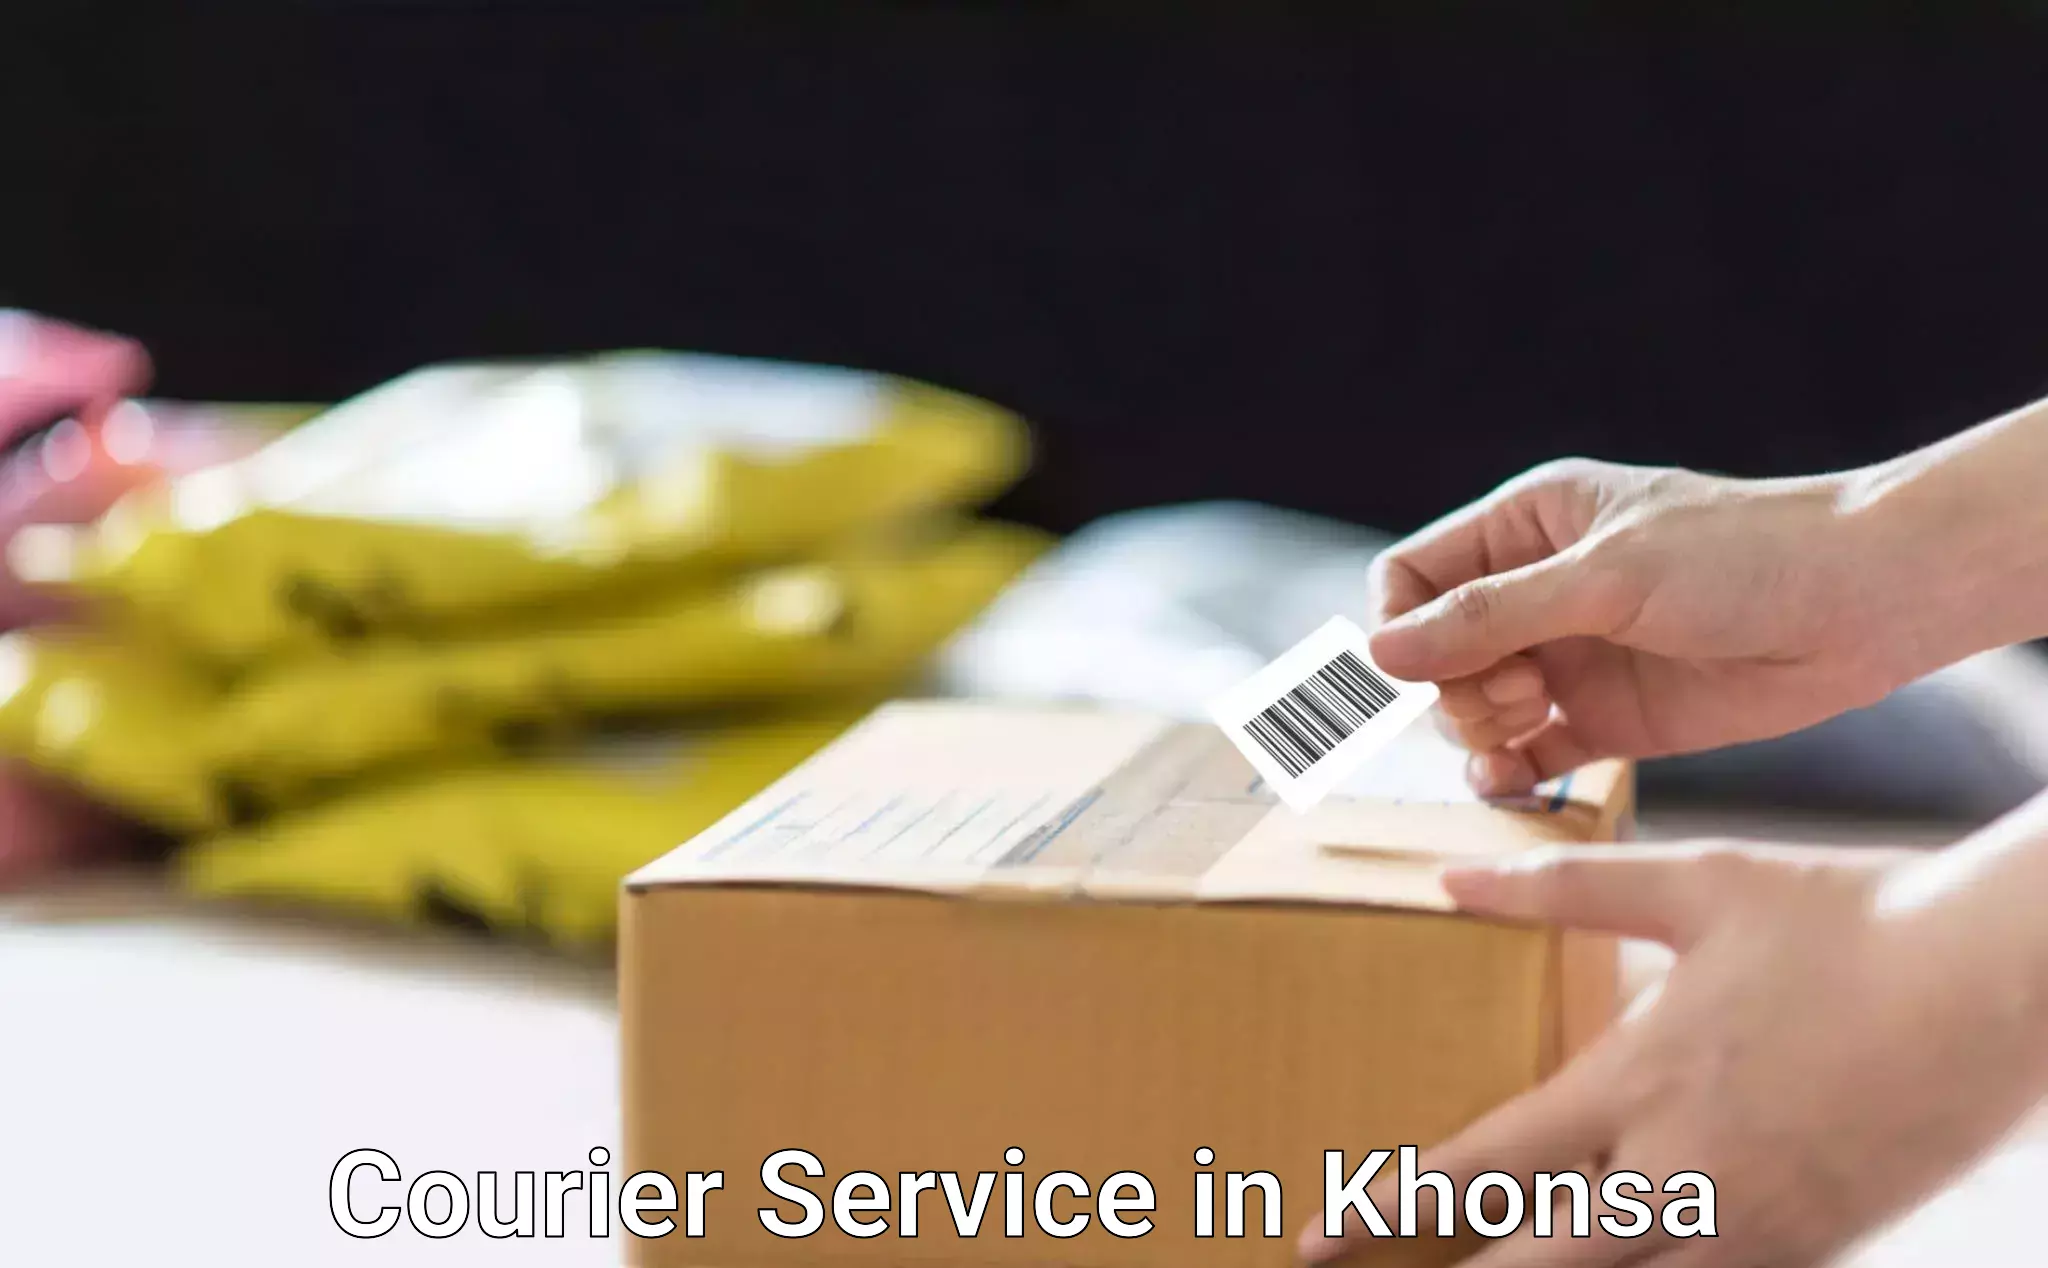 Optimized delivery routes in Khonsa